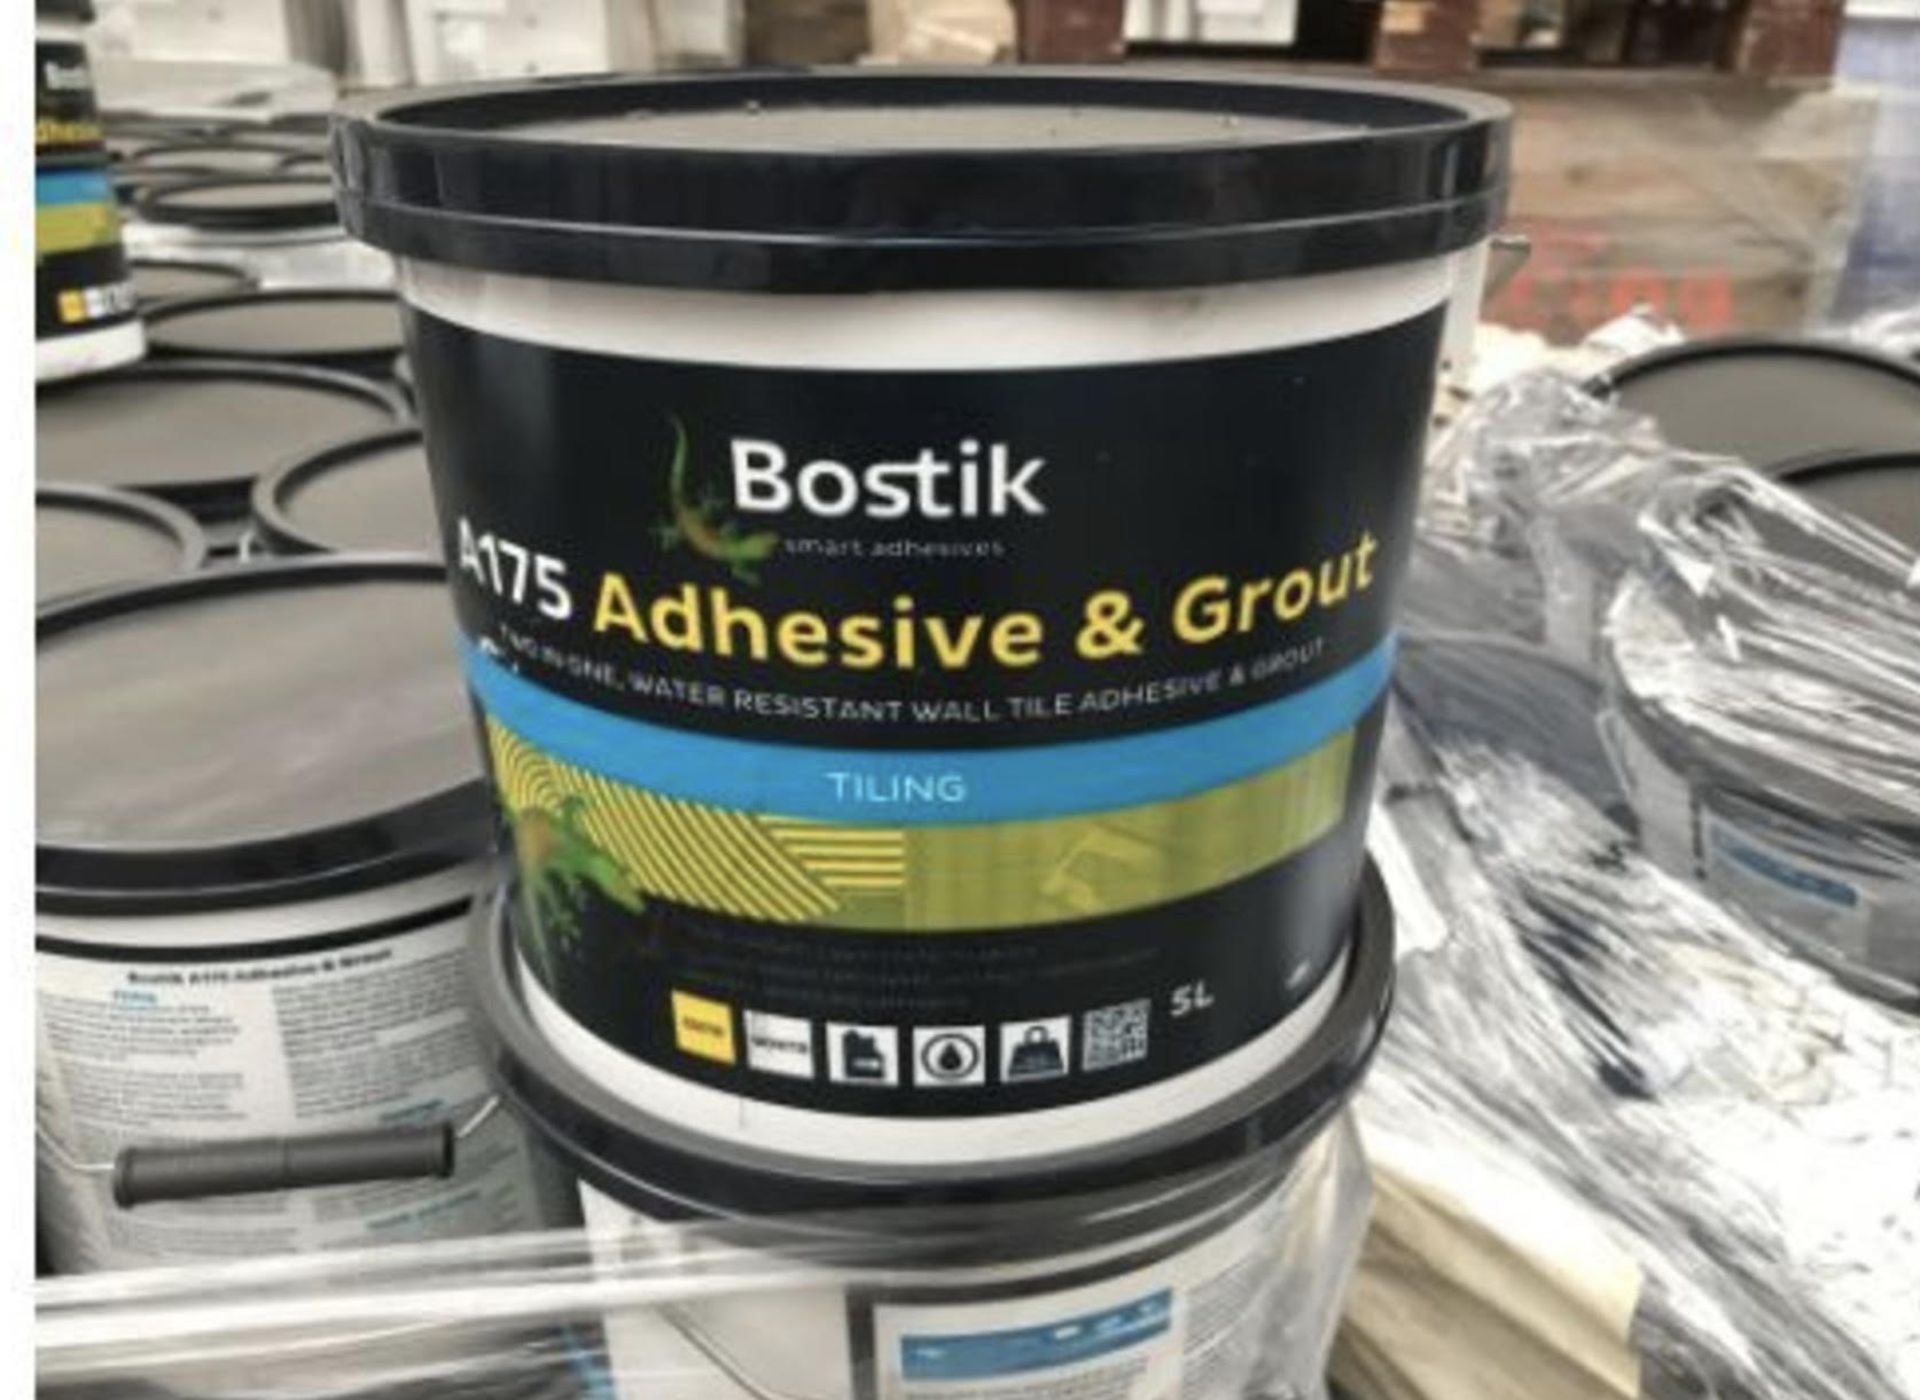 2 x bostik a175 adhesive & grout for tiling